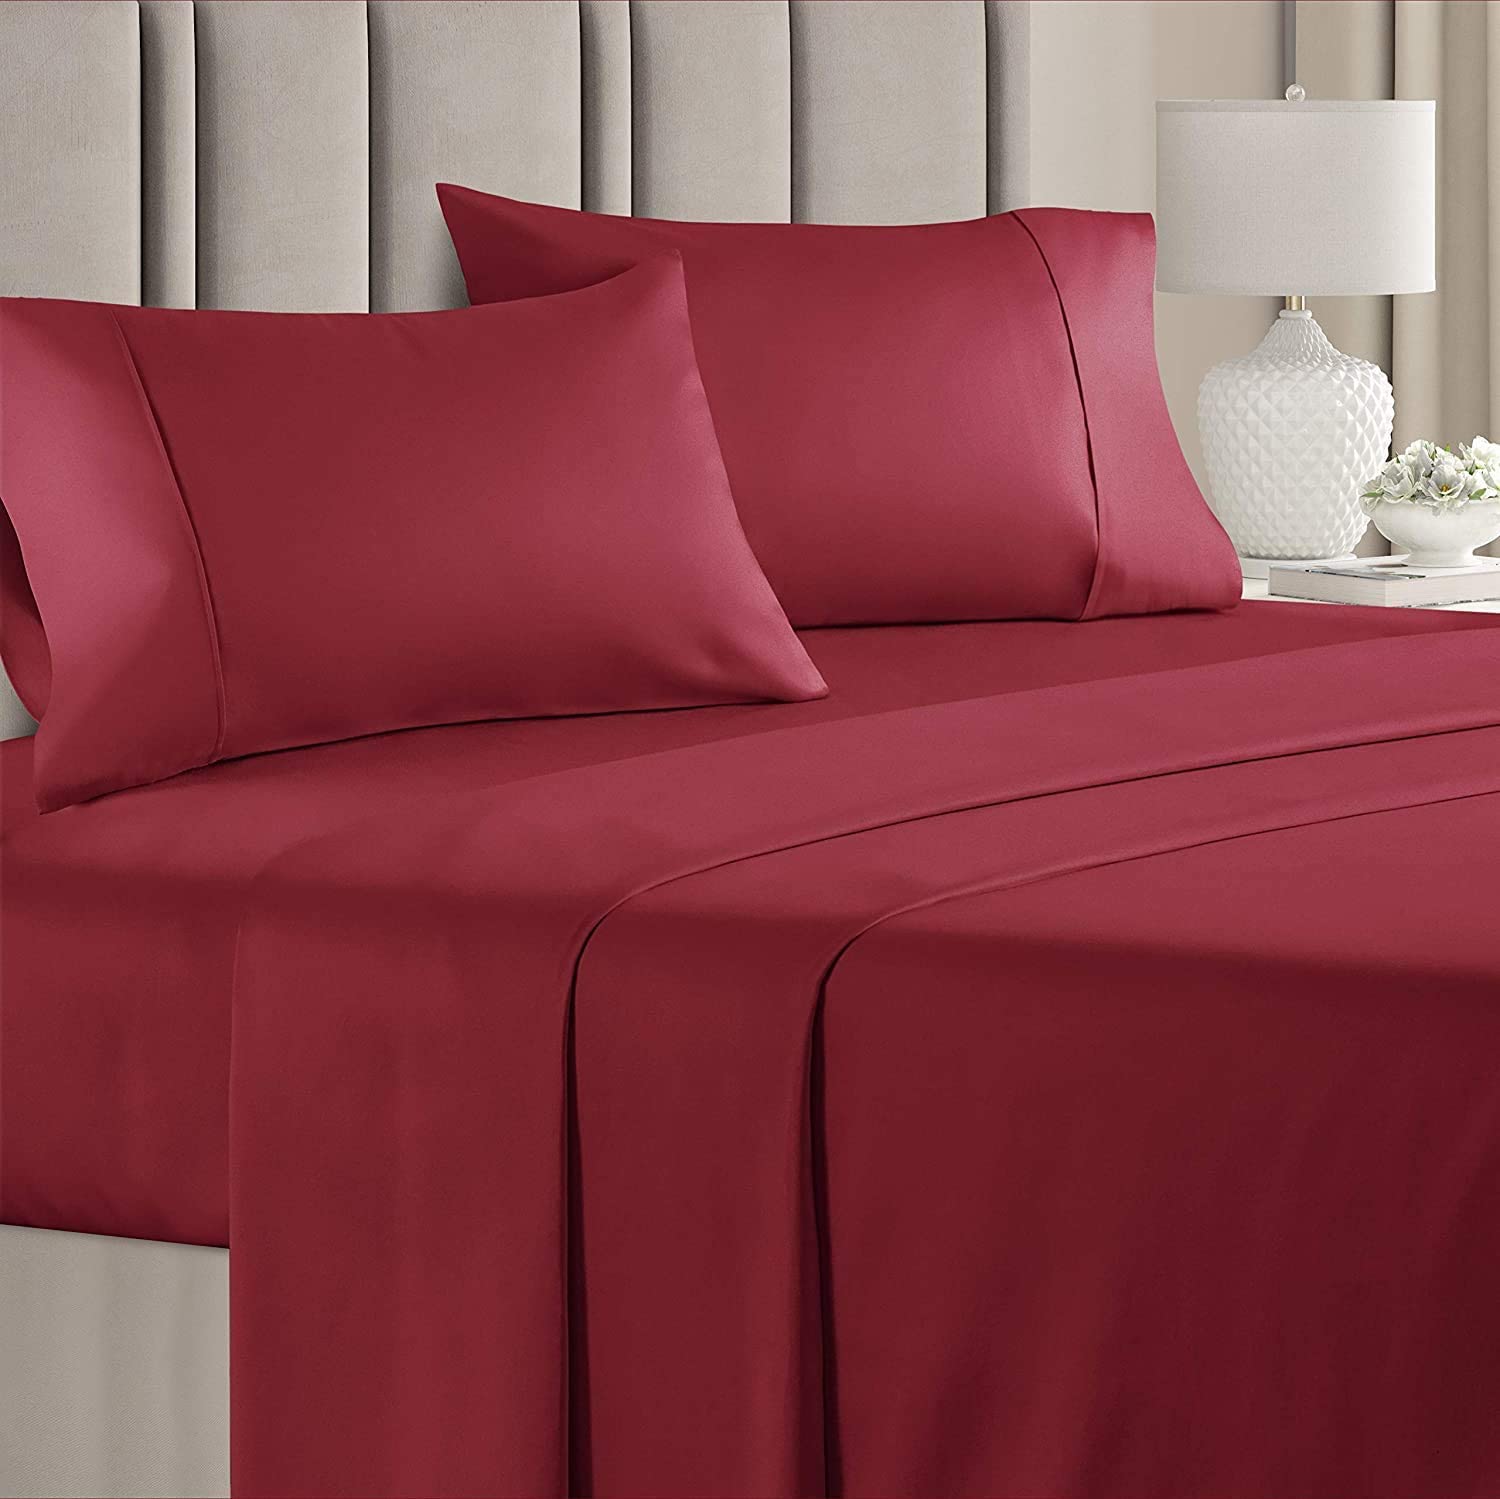 AURORA PLUS Certified 100% Pure Egyptian Cotton Sheet Set – 400 Thread Count- 4 Piece- Sateen Weave- Long Staple Combed Cotton-Extra Soft Smooth Silky- Sateen Weave (Queen,Burgundy)